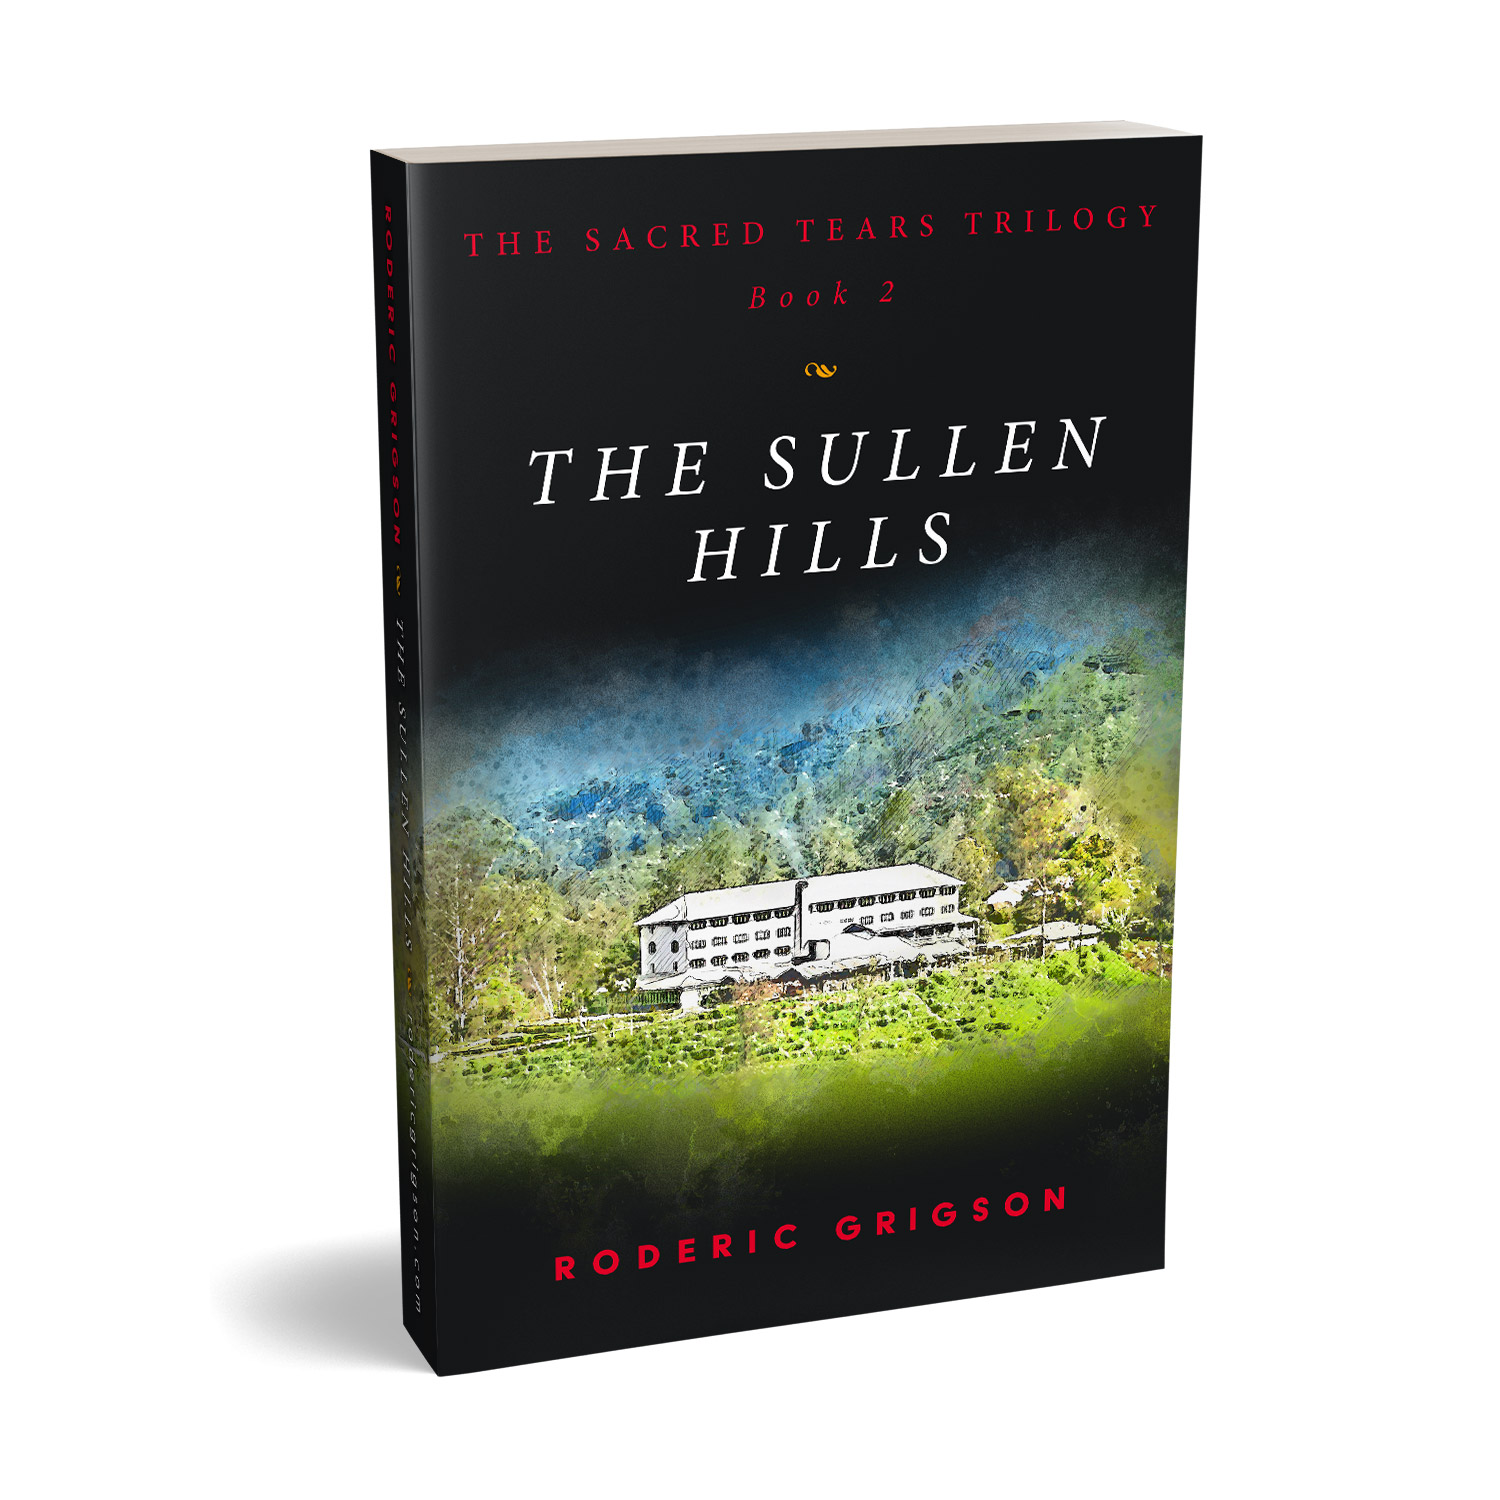 'The Sullen Hills' is the second part in a dramatic trilogy by Roderic Grigson, set during the recent Sri Lankan Civil War. The book cover and interior were designed by Mark Thomas, of coverness.com. To find out more about my book design services, please visit www.coverness.com.